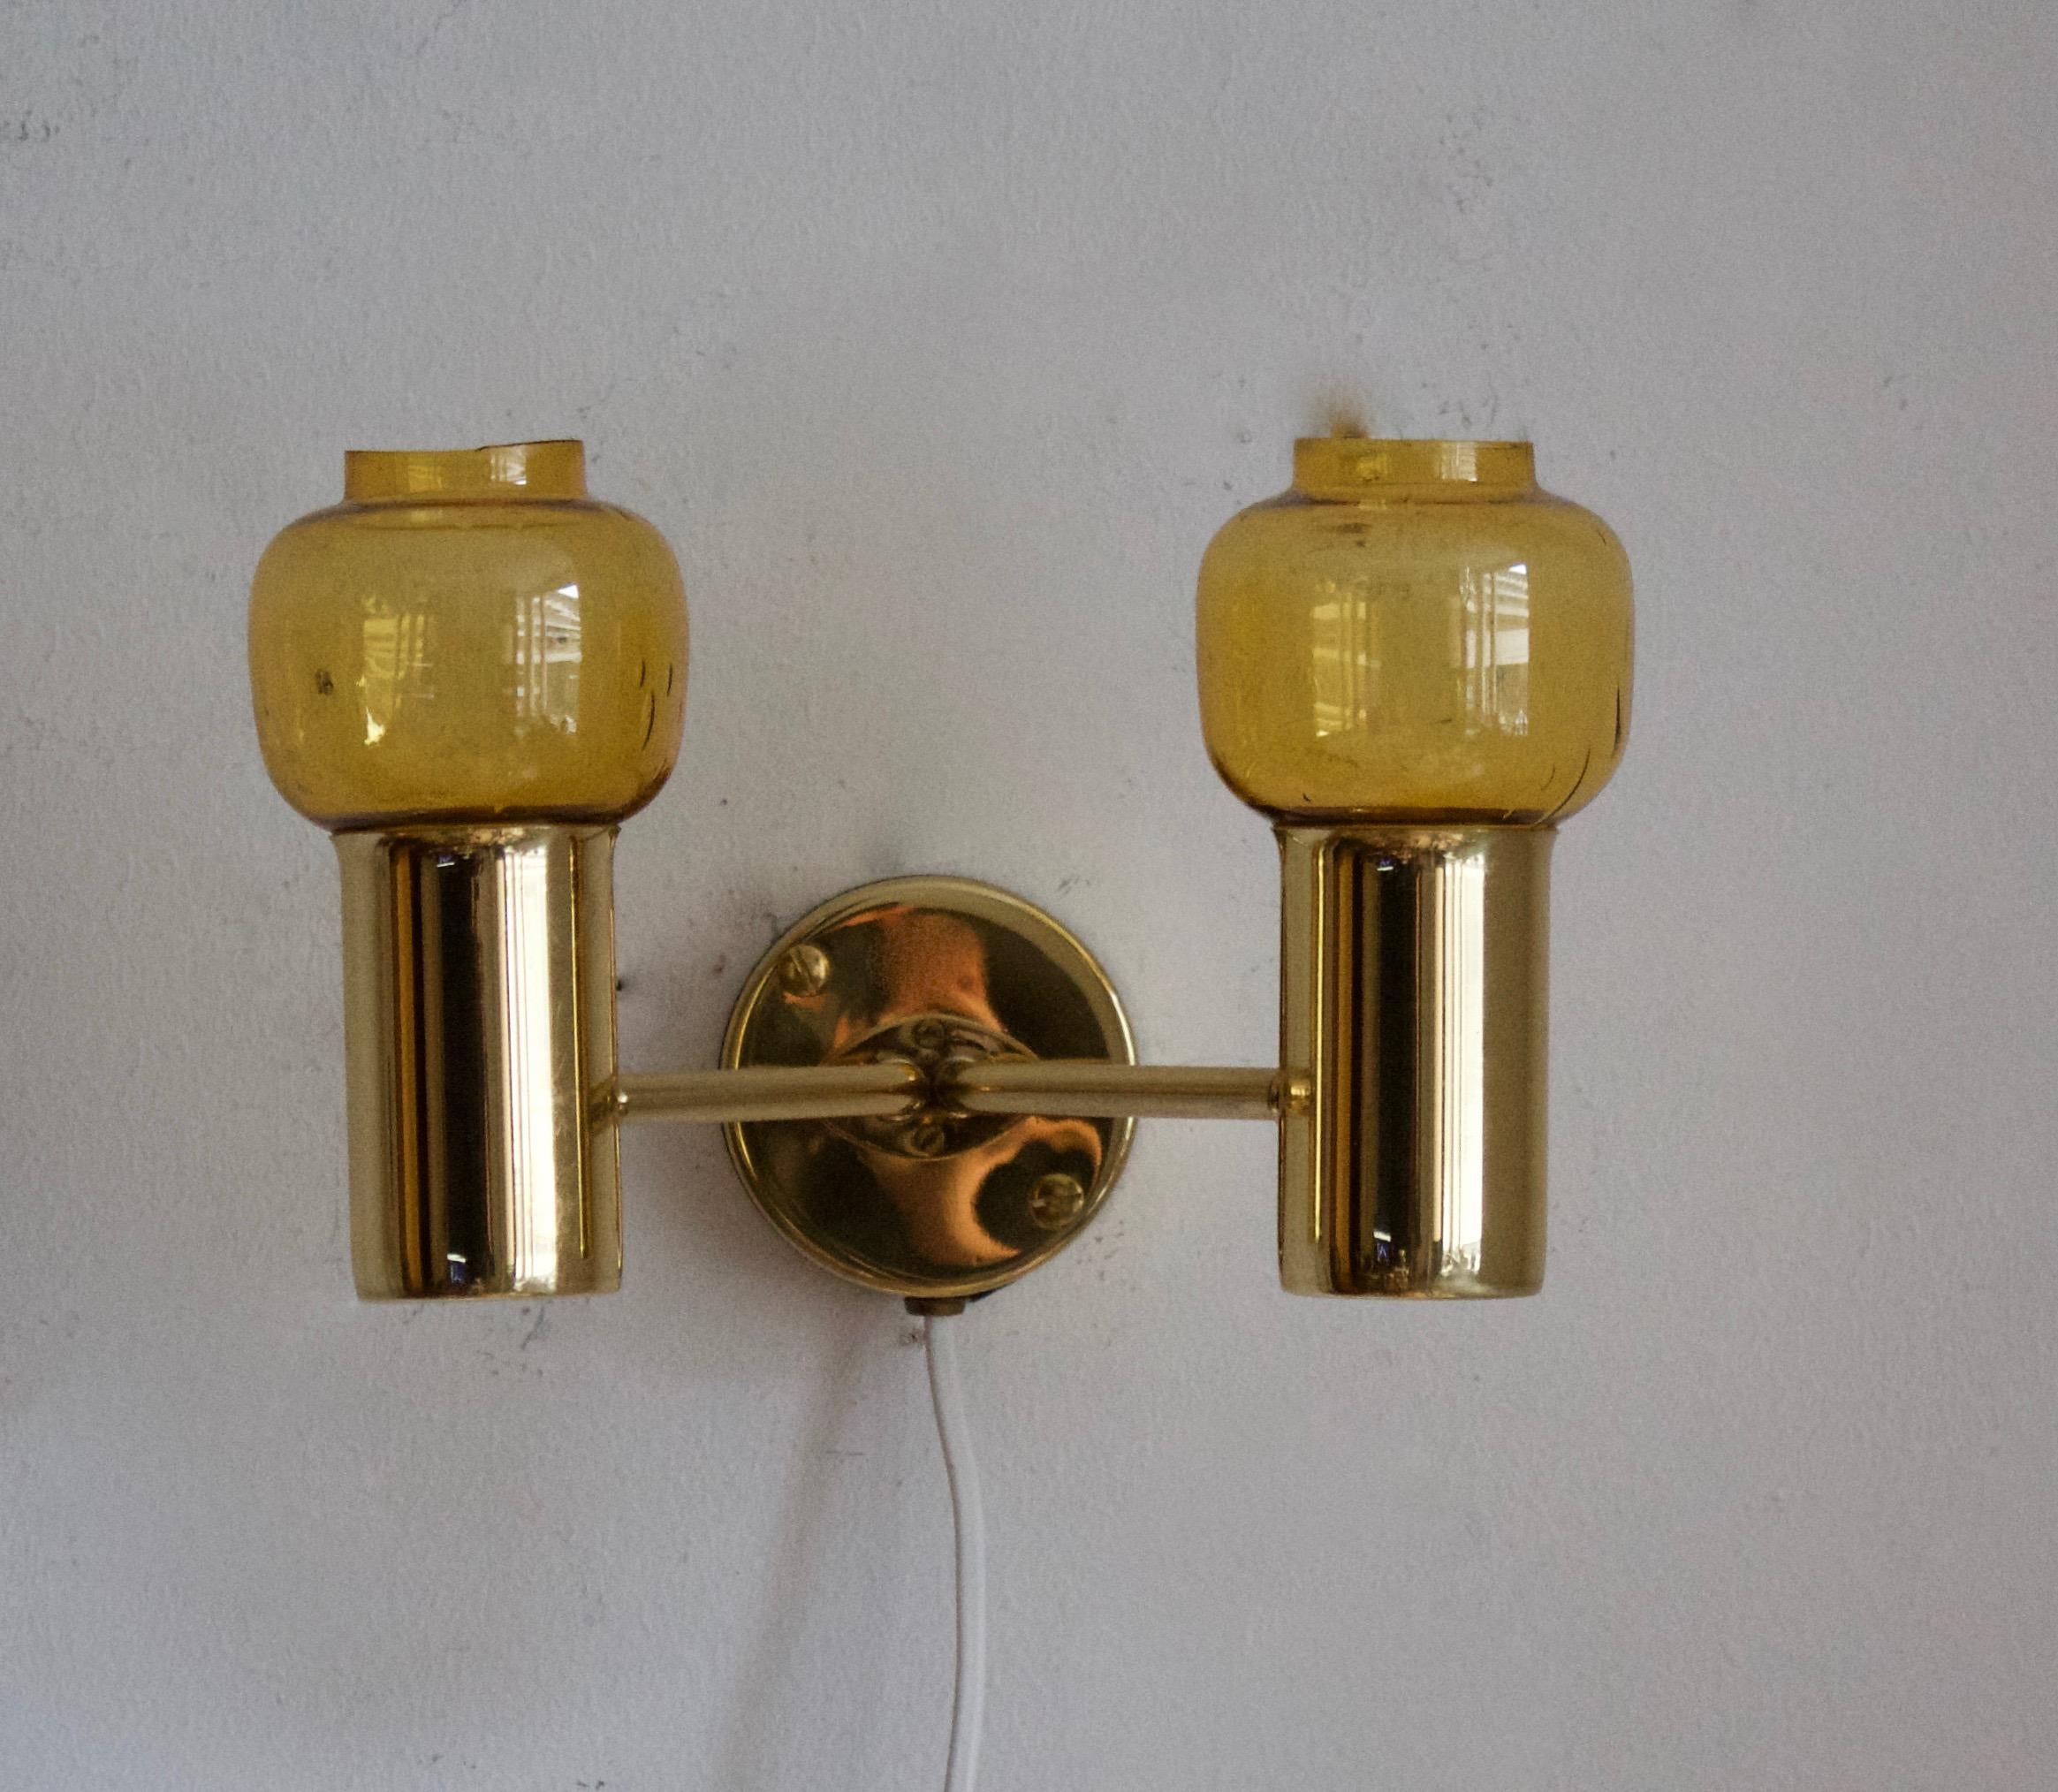 A two-armed wall light, designed by Hans-Agne Jakobsson for his own firm in Markaryd, Sweden. c. 1960s.